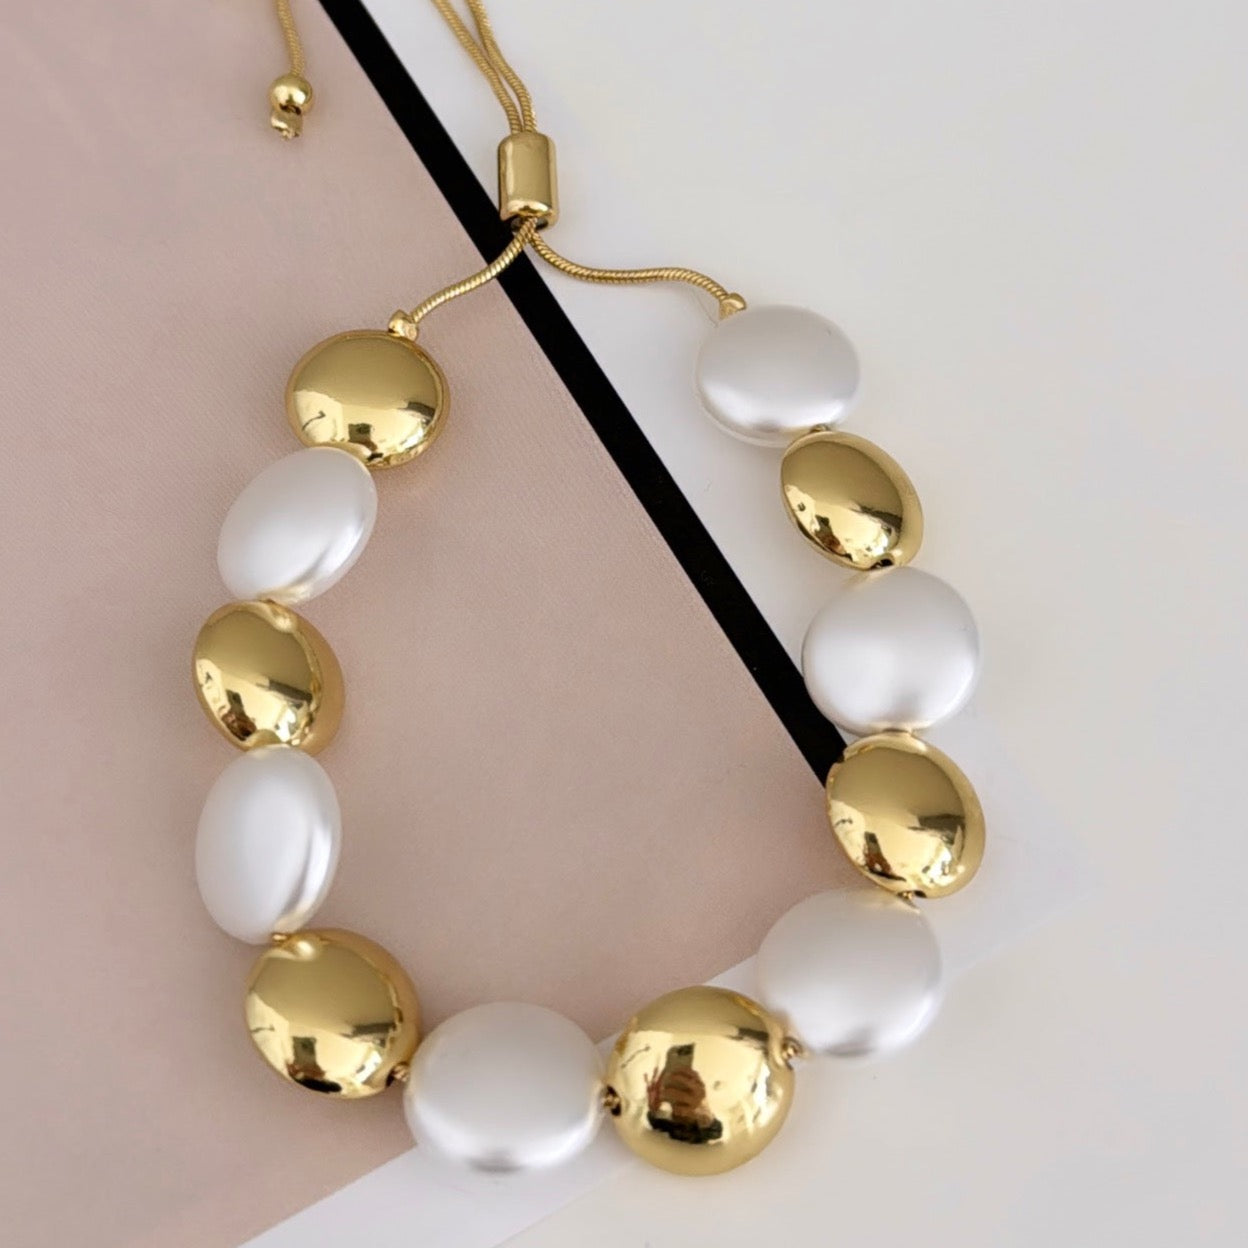 Pearls and Gold Bead Bracelet